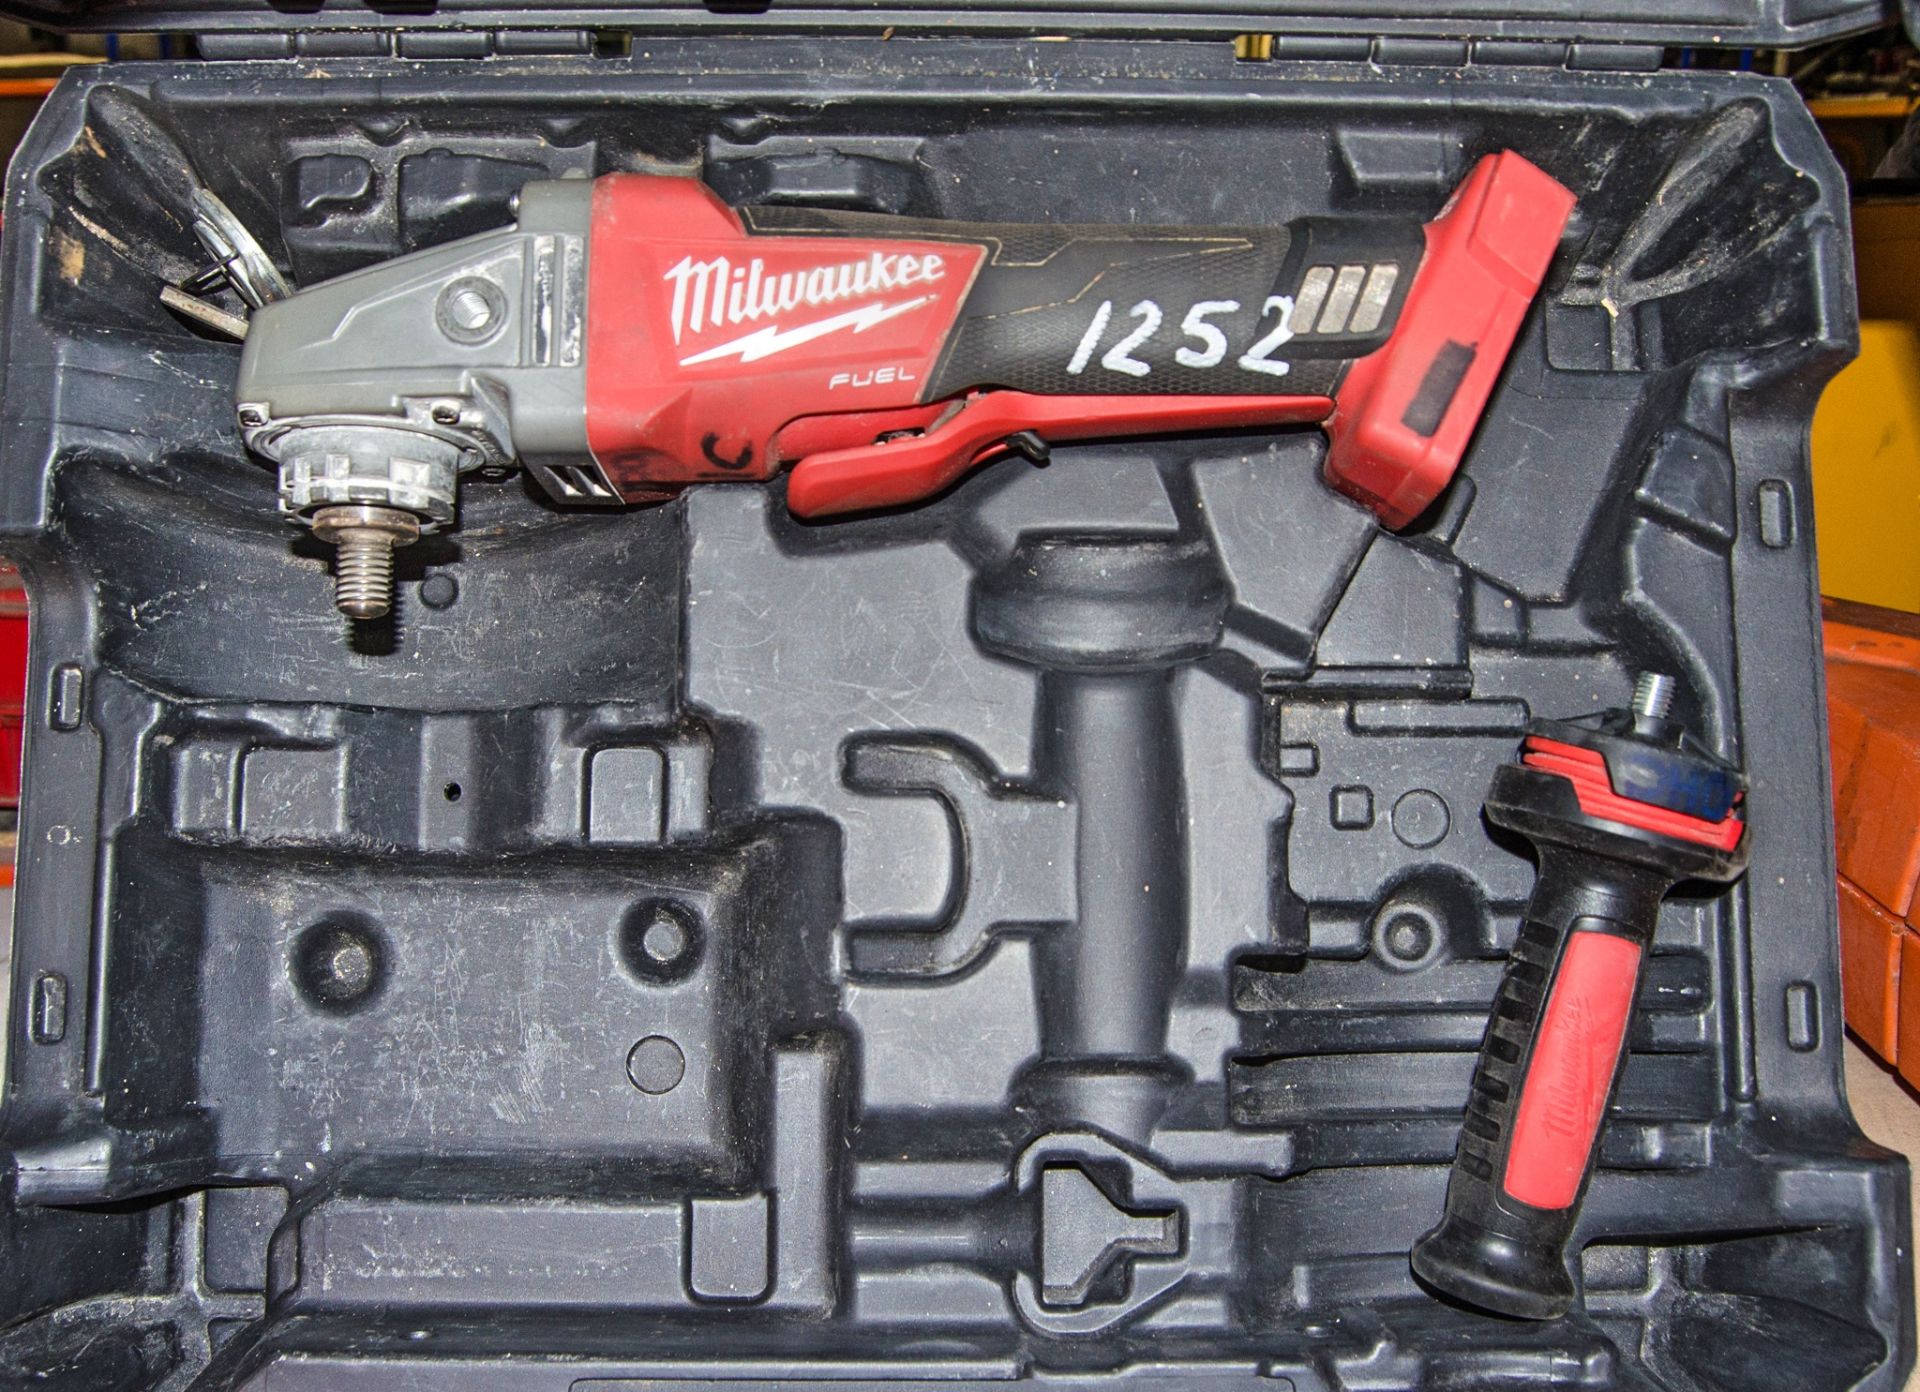 Milwaukee 18v cordless angle grinder c/w carry case ** No battery or charger **